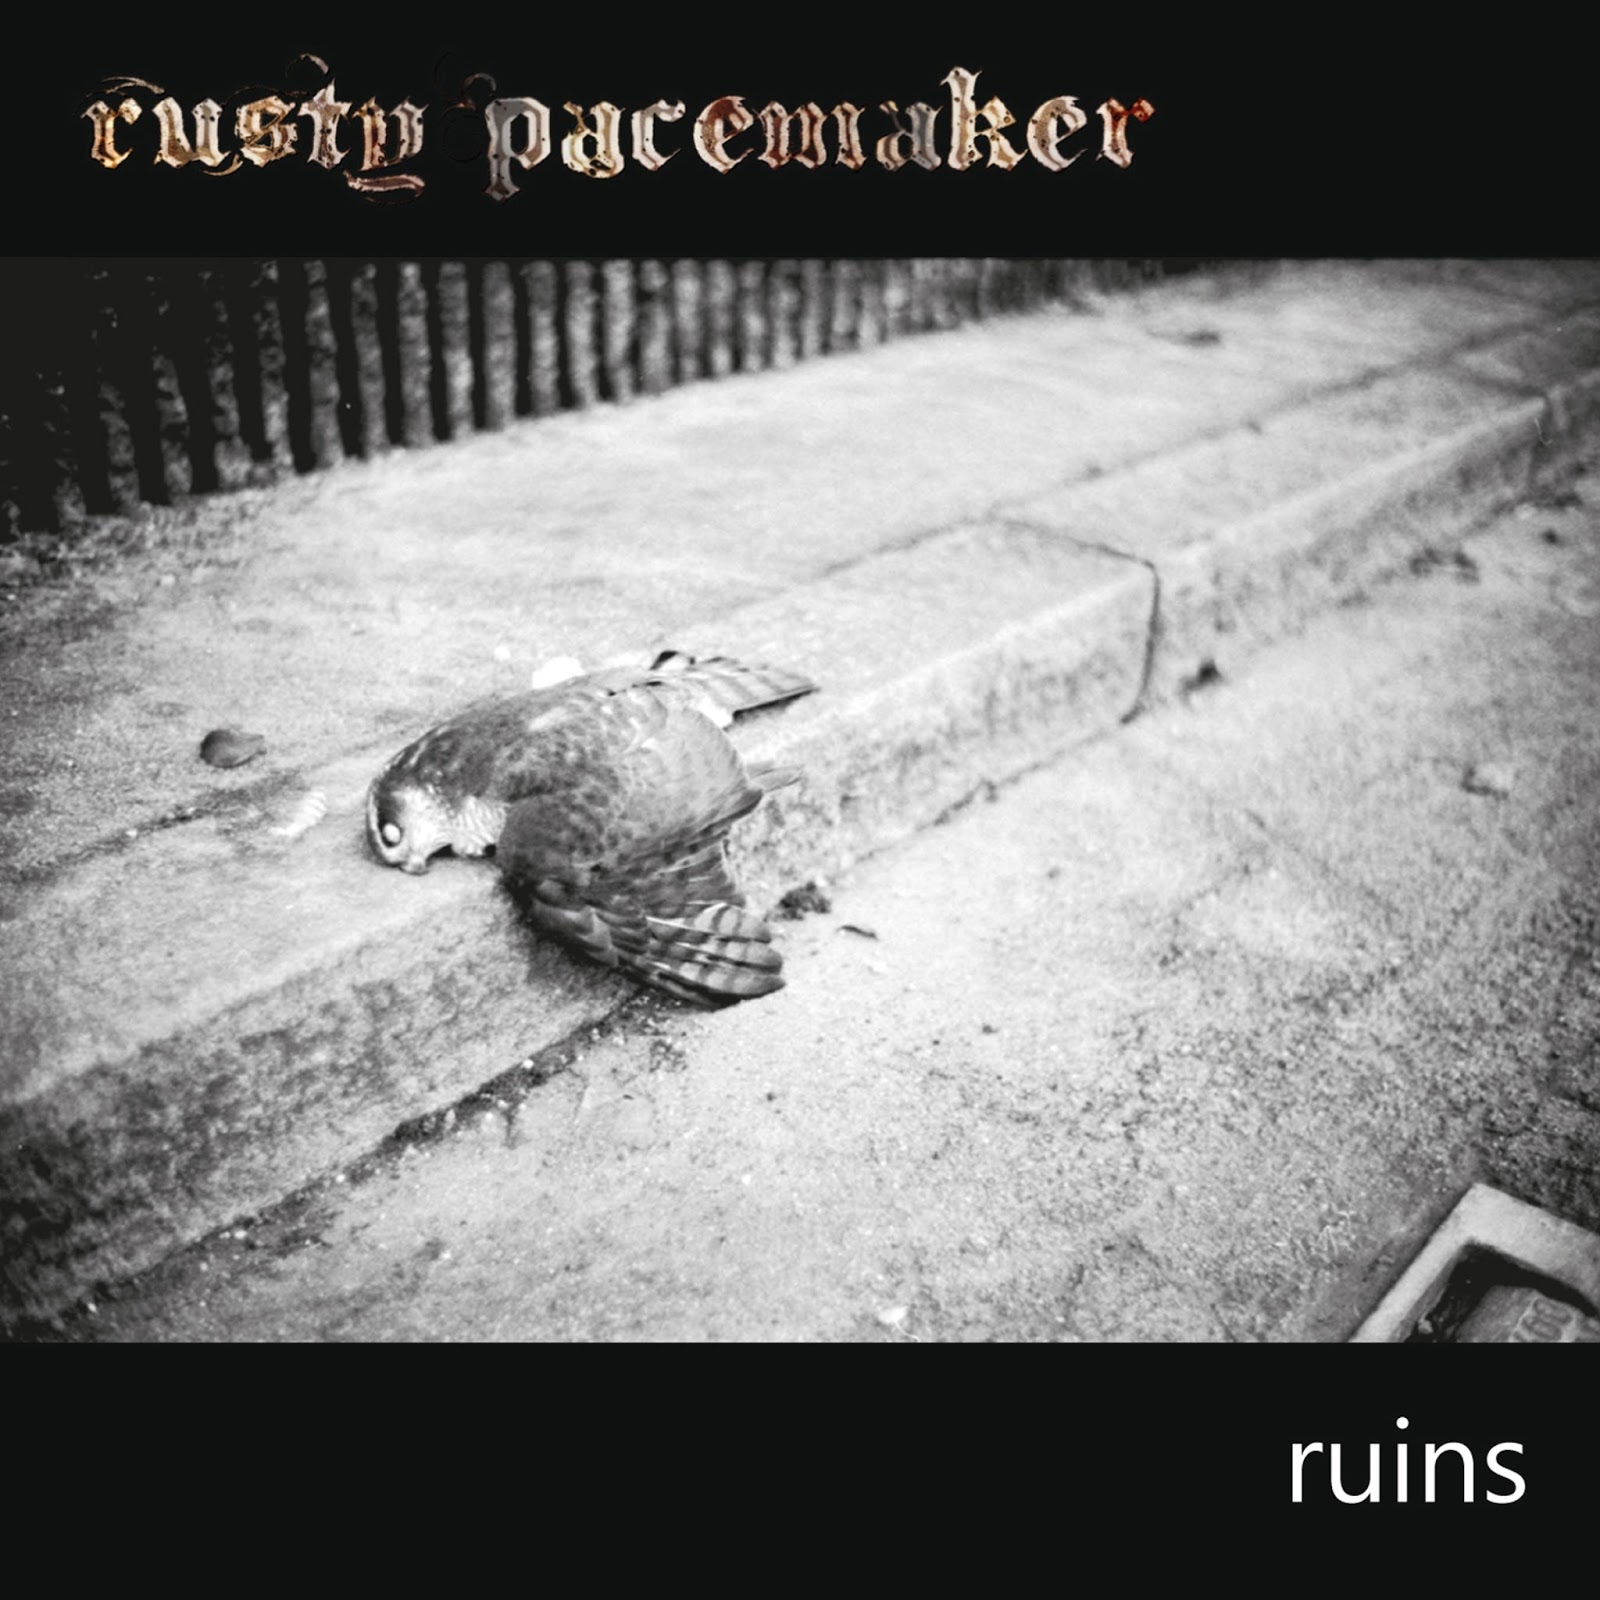 Rusty Pacemaker - Ruins